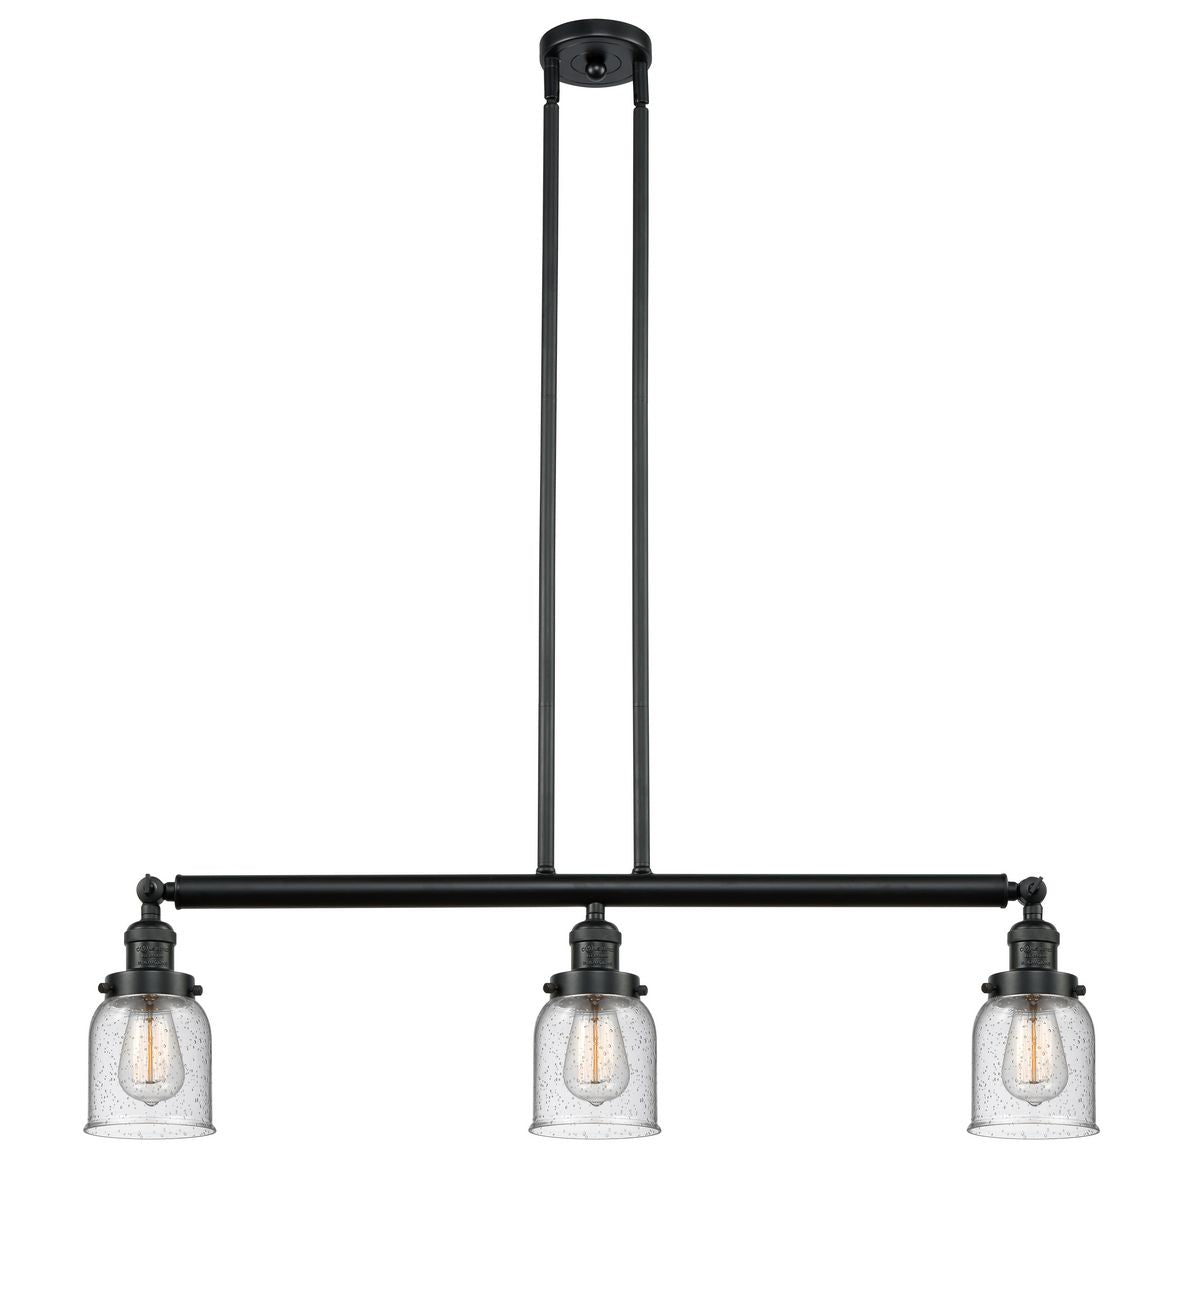 213-BK-G54 3-Light 37.5" Matte Black Island Light - Seedy Small Bell Glass - LED Bulb - Dimmensions: 37.5 x 7.5 x 10<br>Minimum Height : 20<br>Maximum Height : 44 - Sloped Ceiling Compatible: Yes